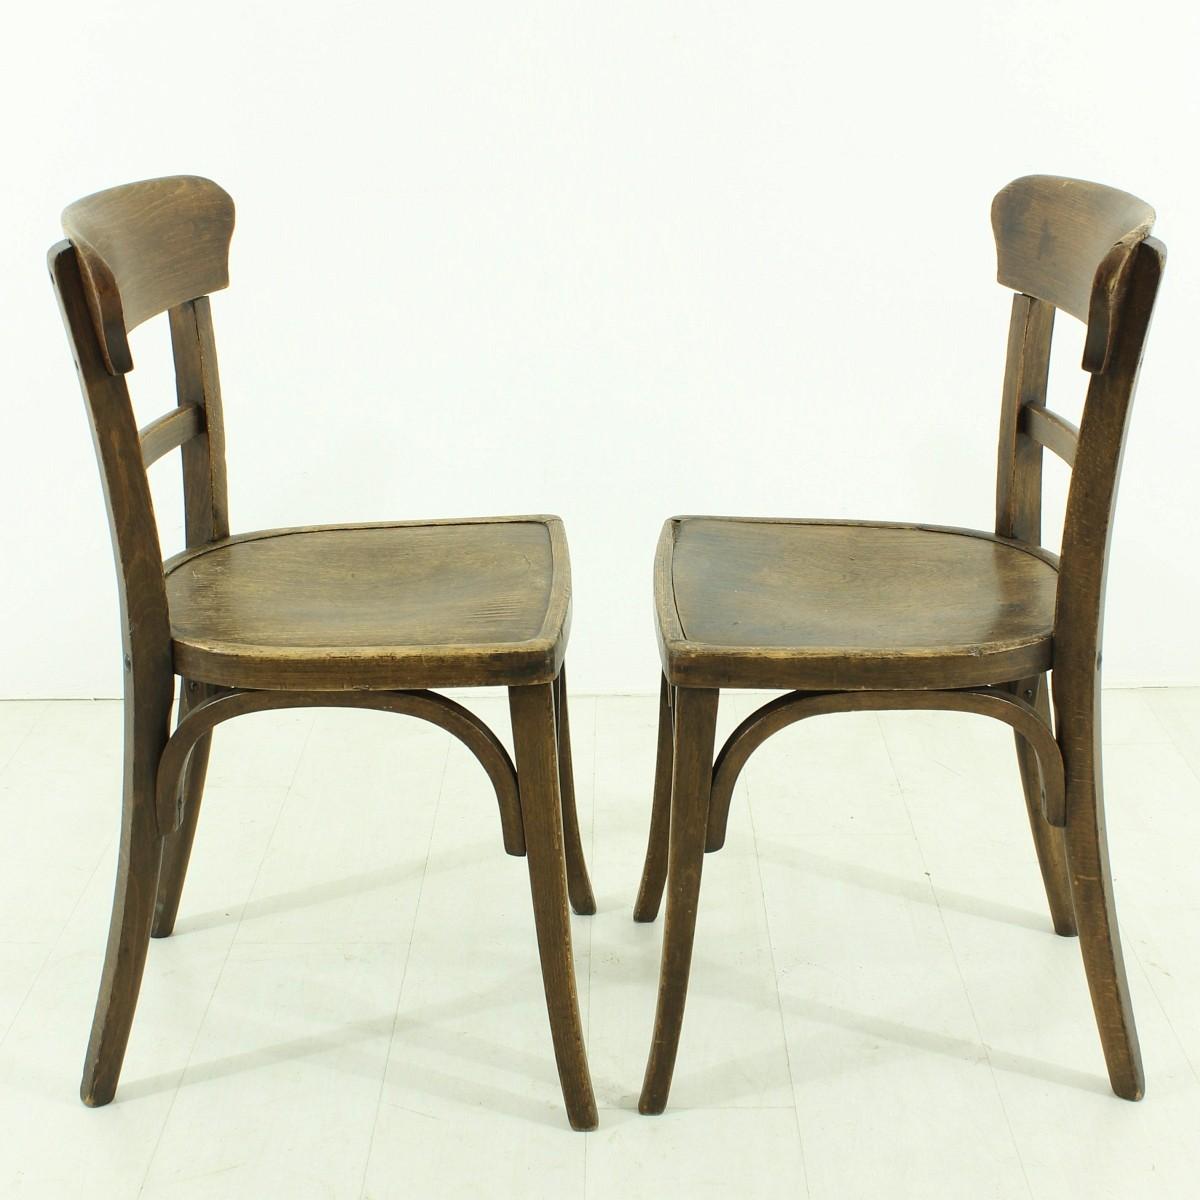 German Antique Set of Two Tavern Chairs, circa 1930s